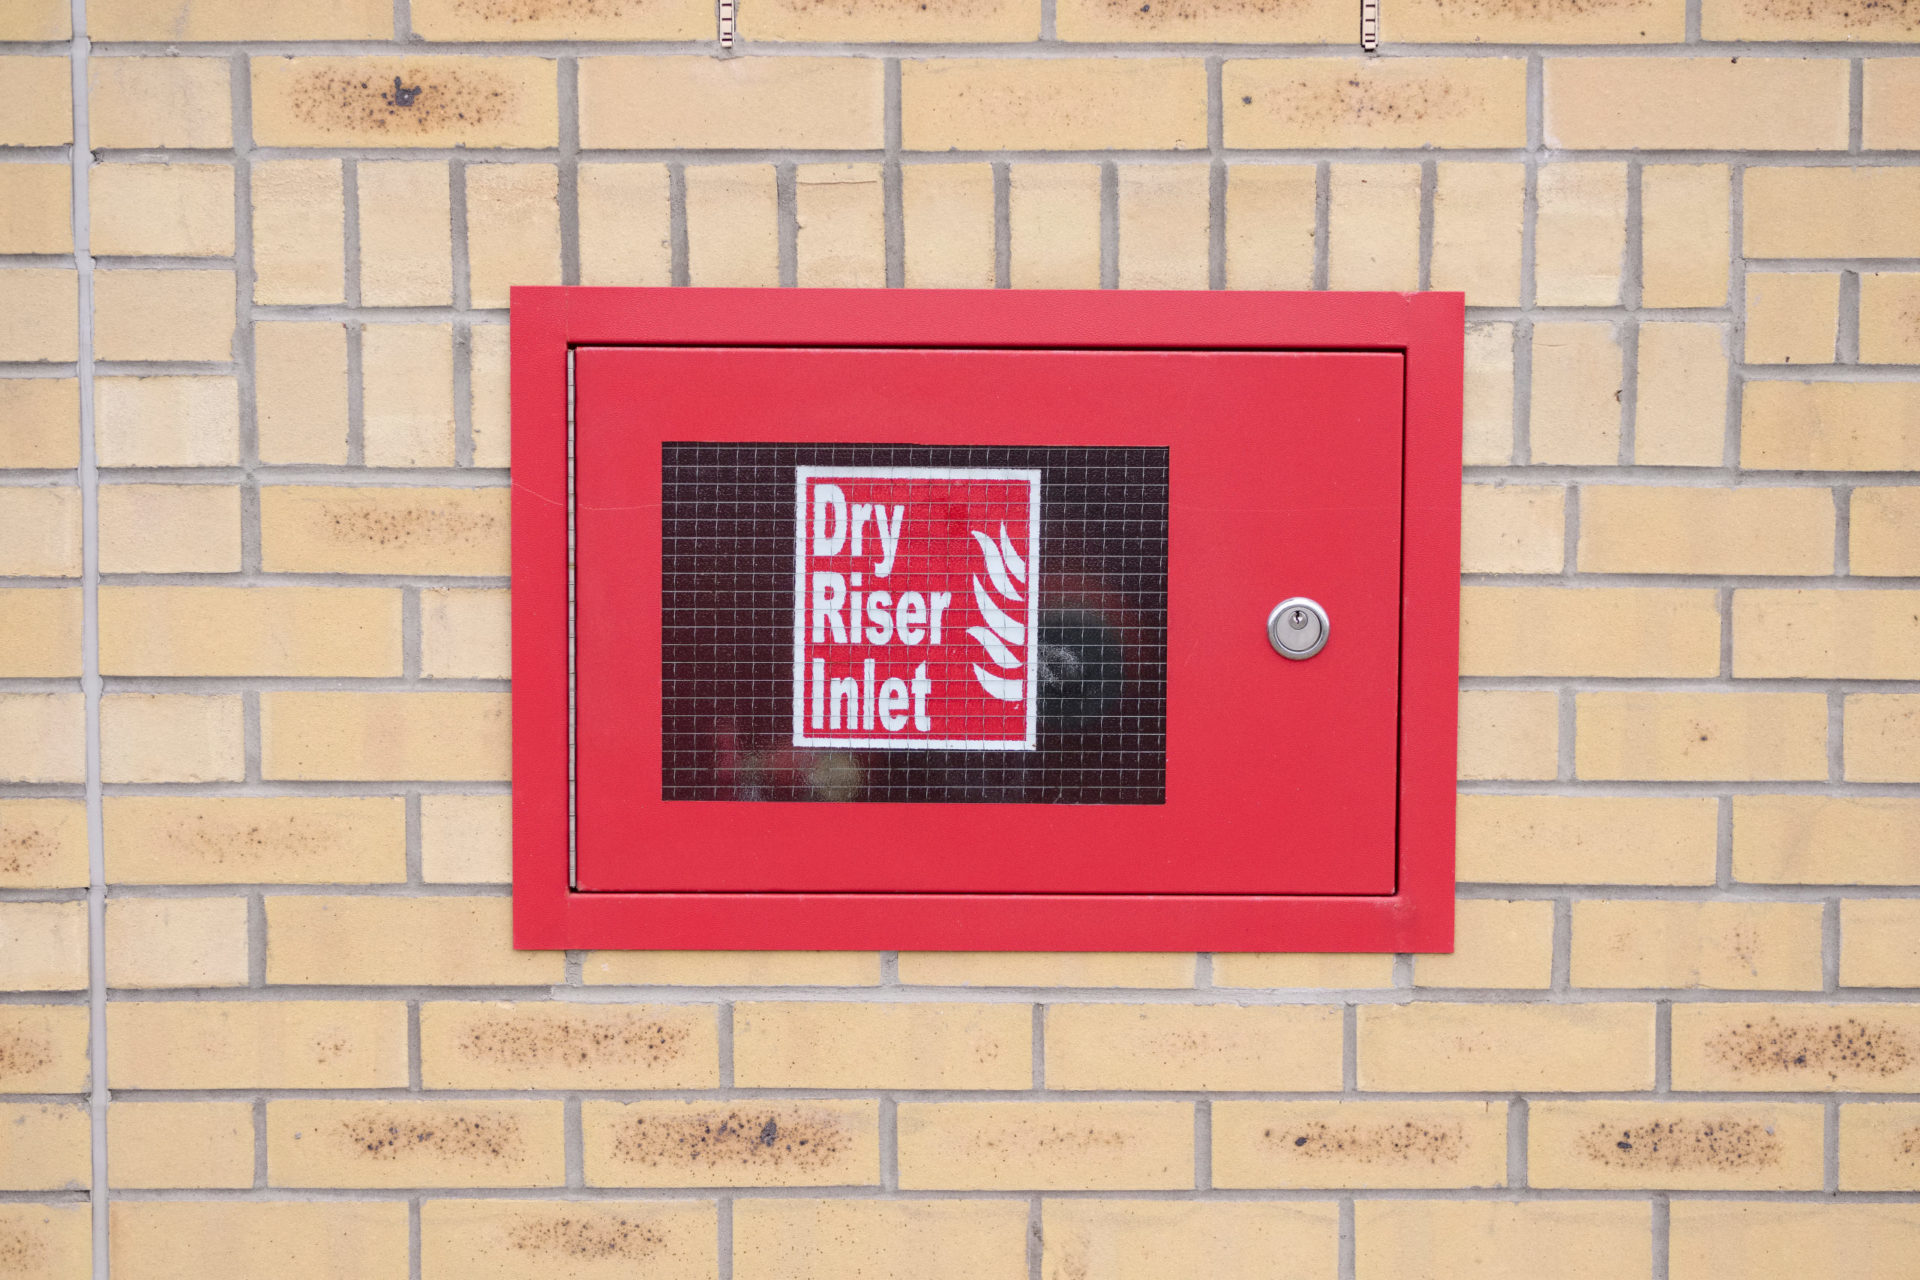 Dry riser inlet box red on brick wall for emergency fire services water connection for hose brigade engine at shopping mall retail park